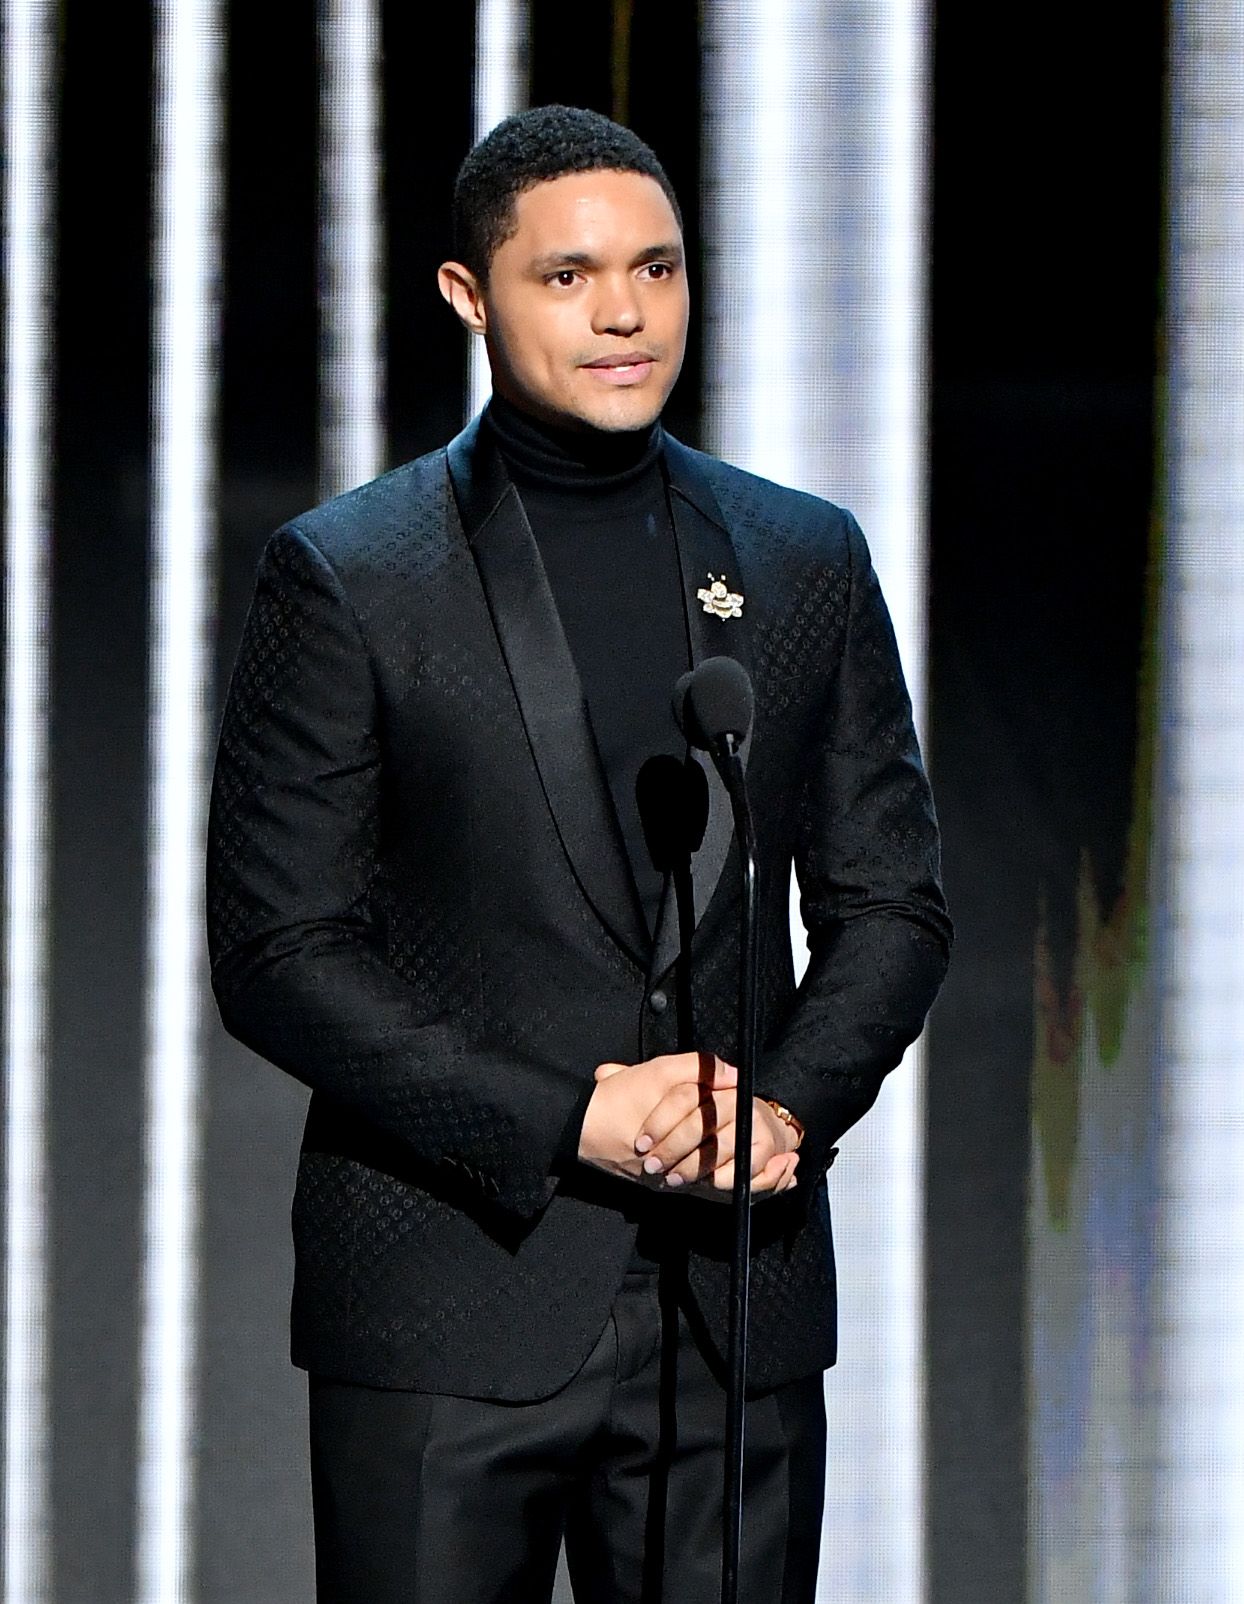 Trevor Noah during the 50th NAACP Image Awards at Dolby Theatre on March 30, 2019 in Hollywood, California. | Source: Getty Images